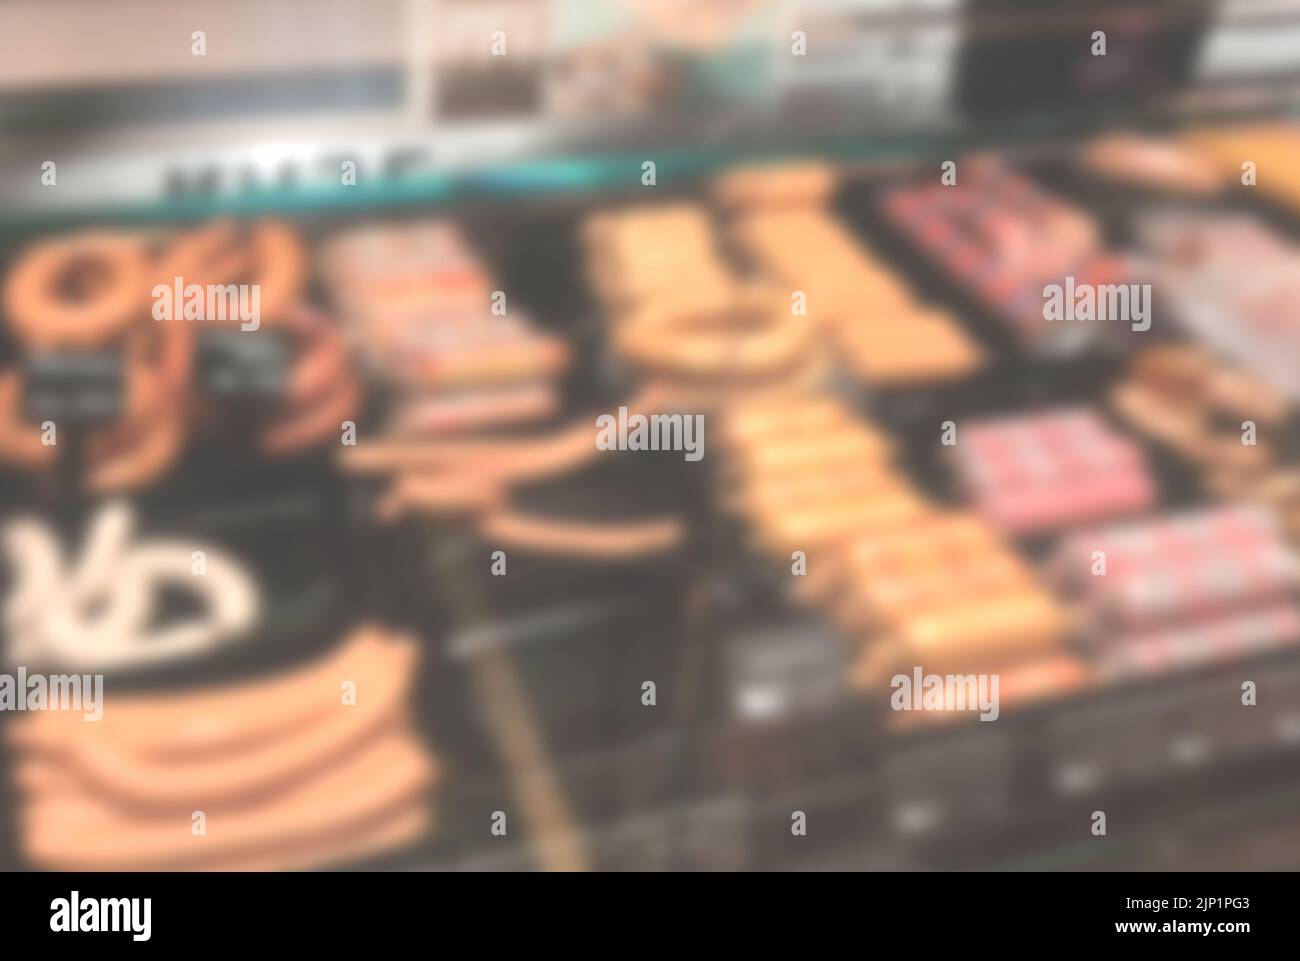 blurry background image of meat in supermarket Stock Photo